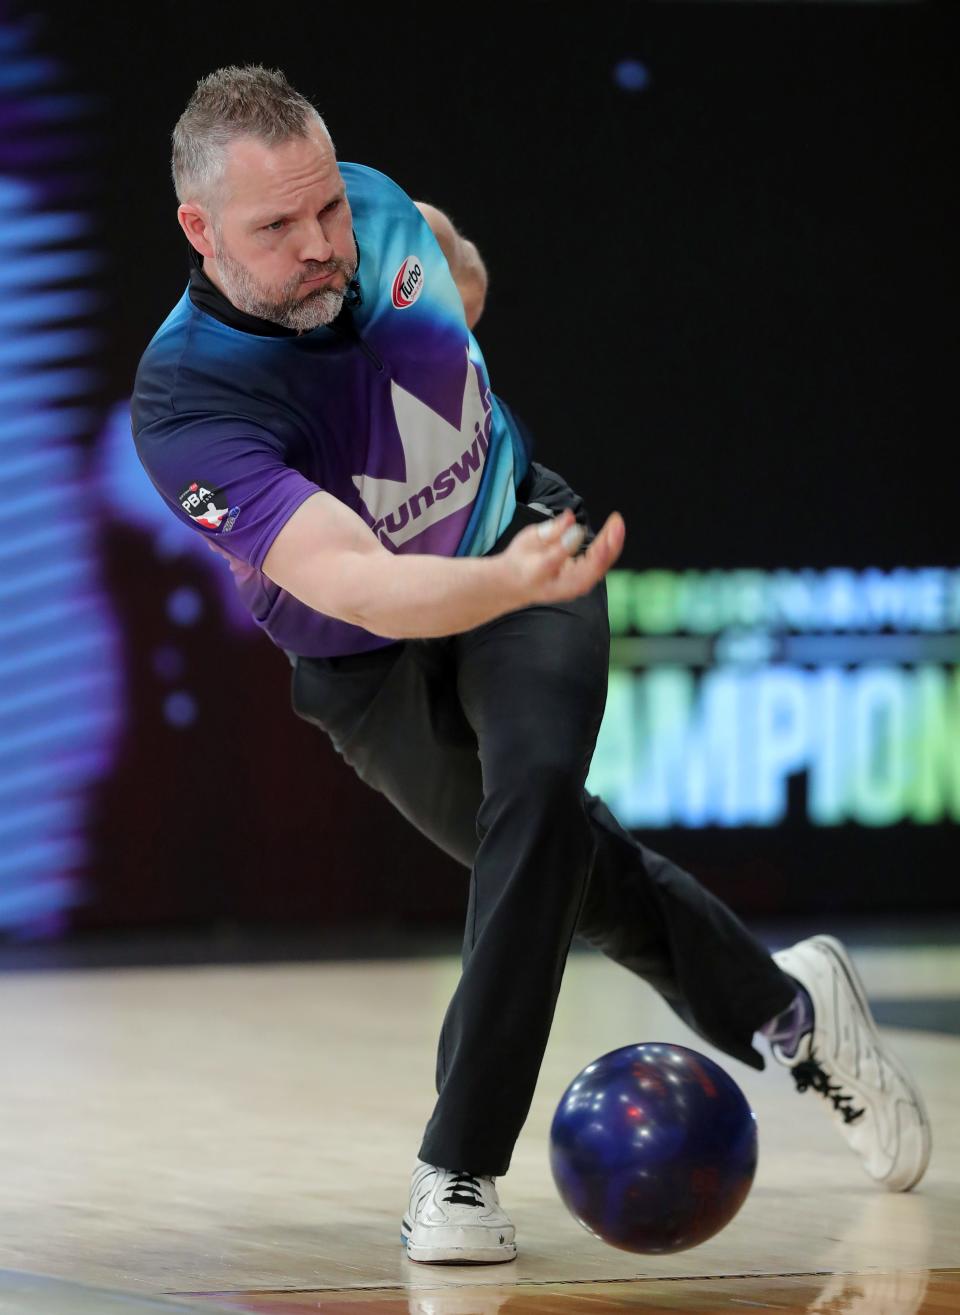 Jason Sterner competes against Marshall Kent during the PBA Tournament of Champions on Sunday.